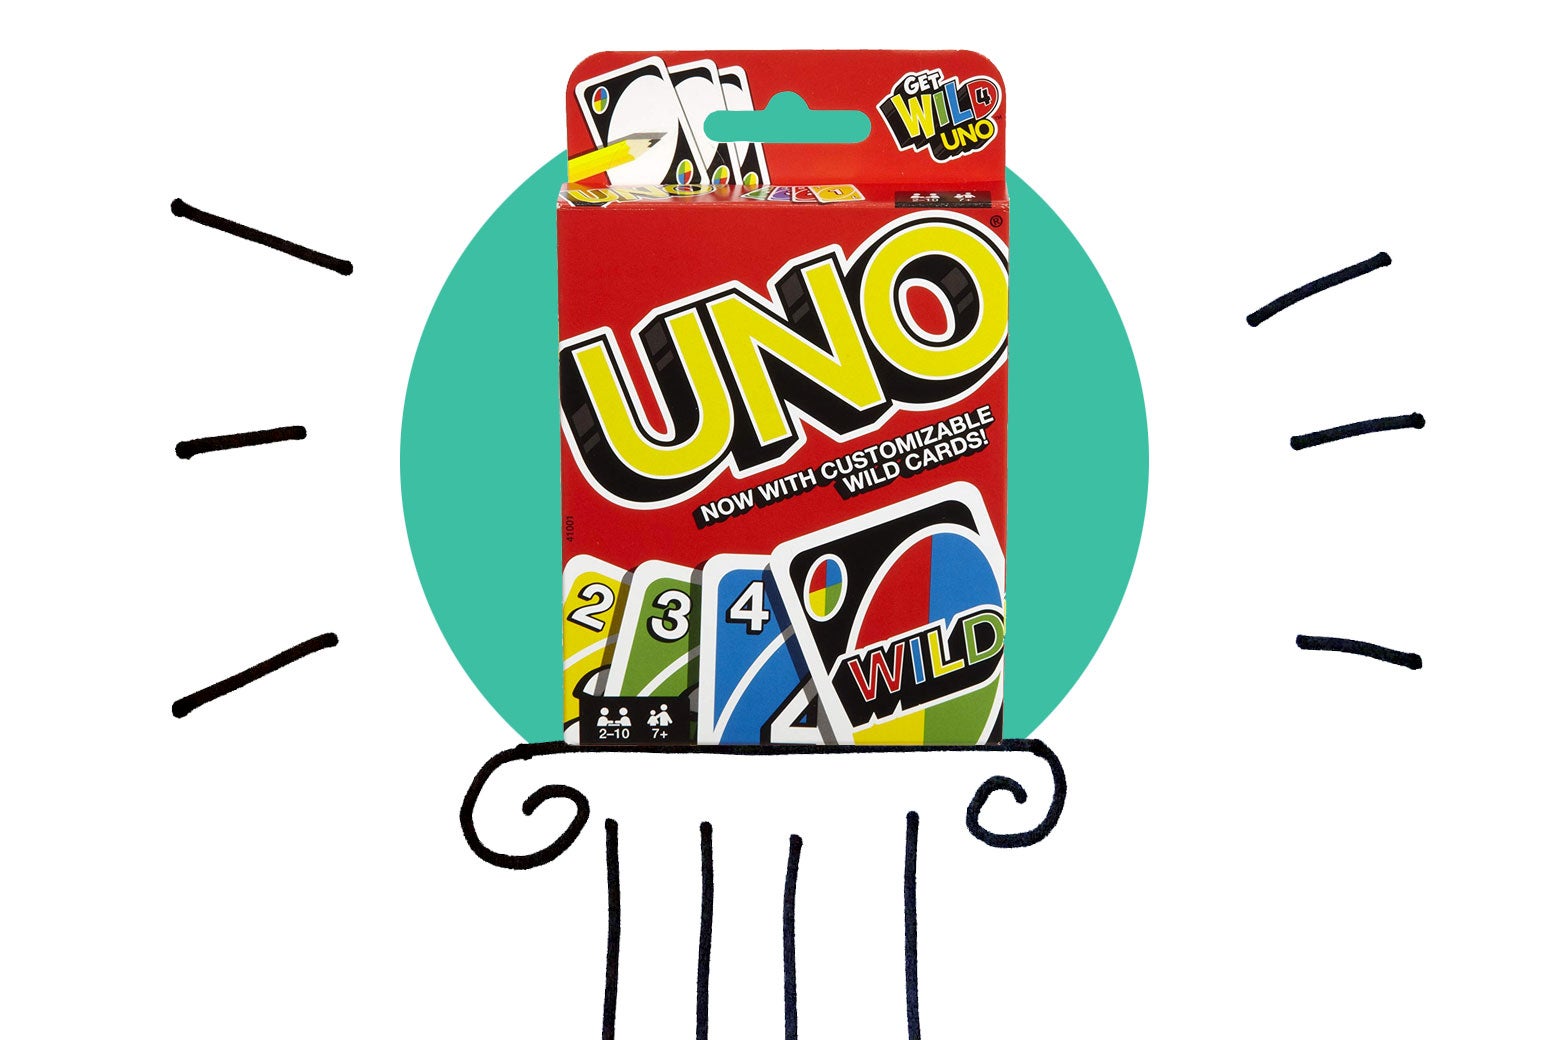 The game Uno on a pedestal.